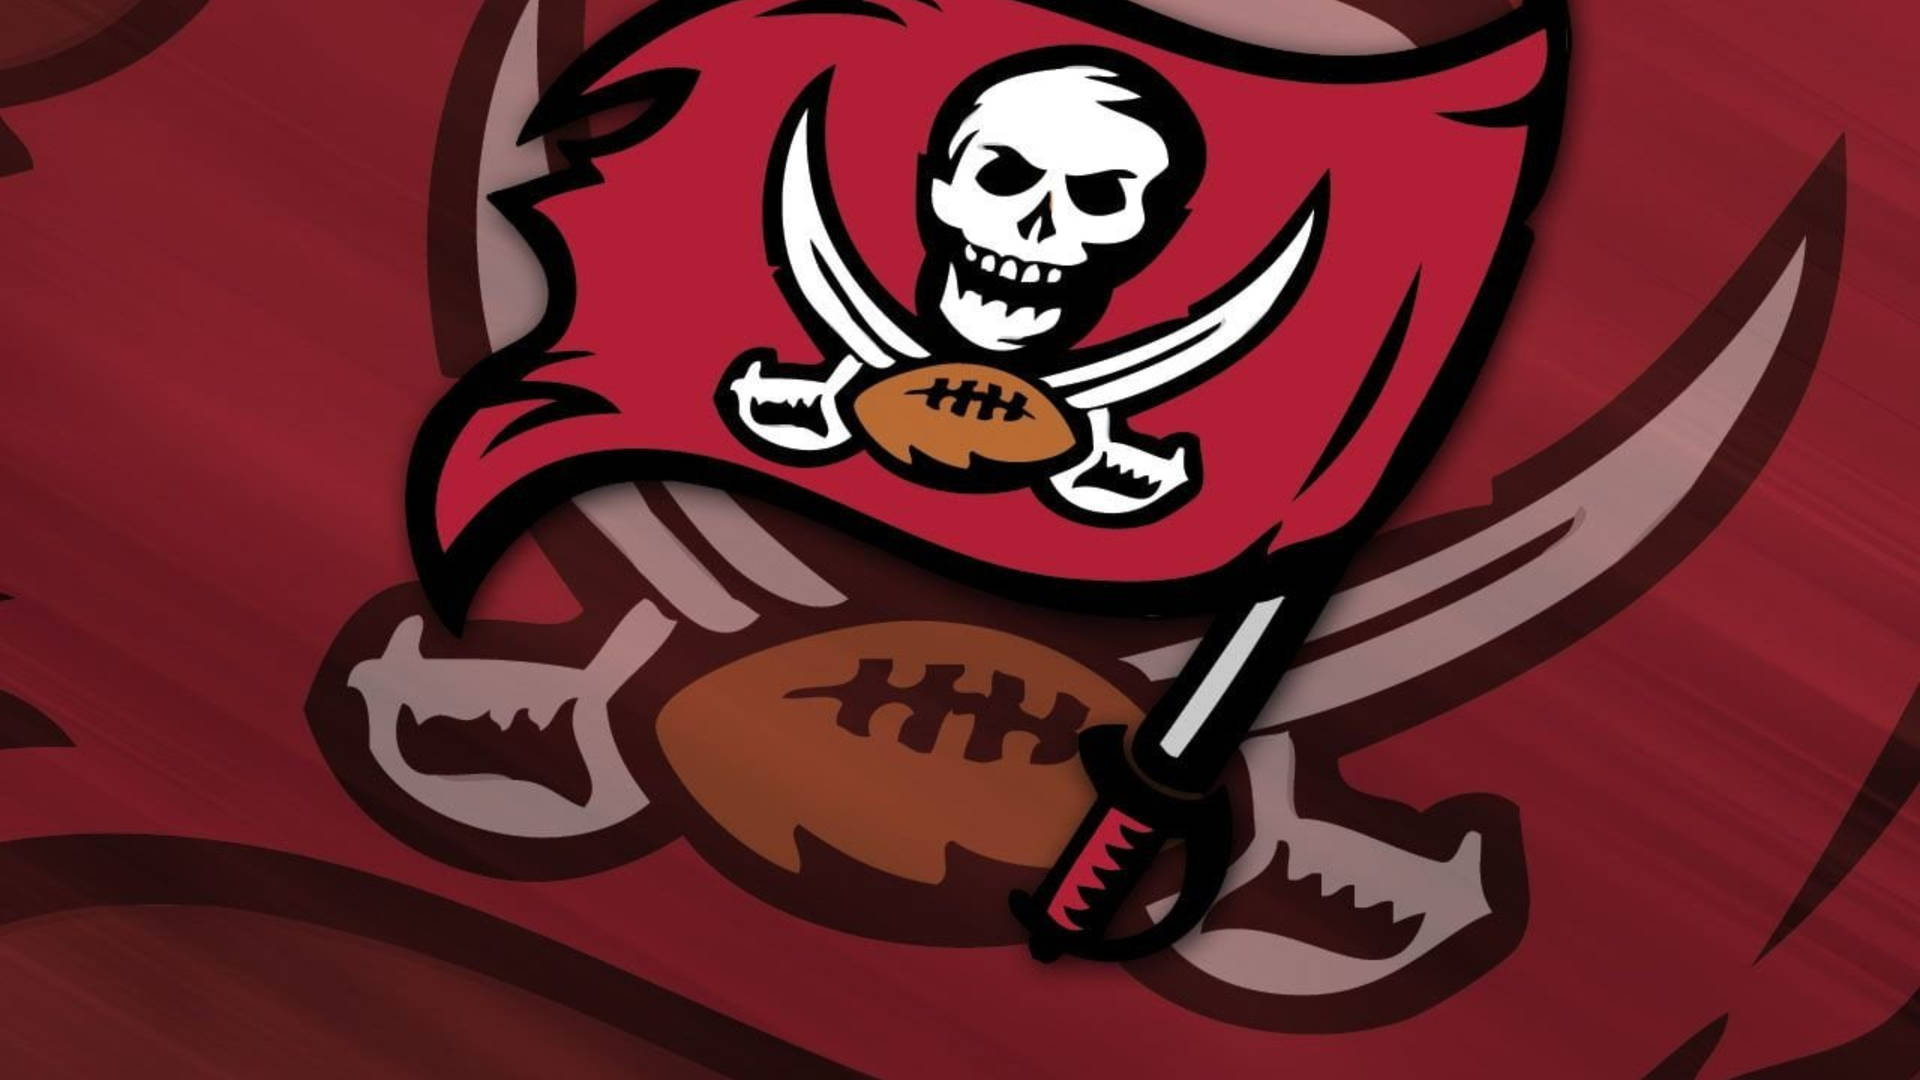 Tampa Bay Buccaneers Graphic Logo